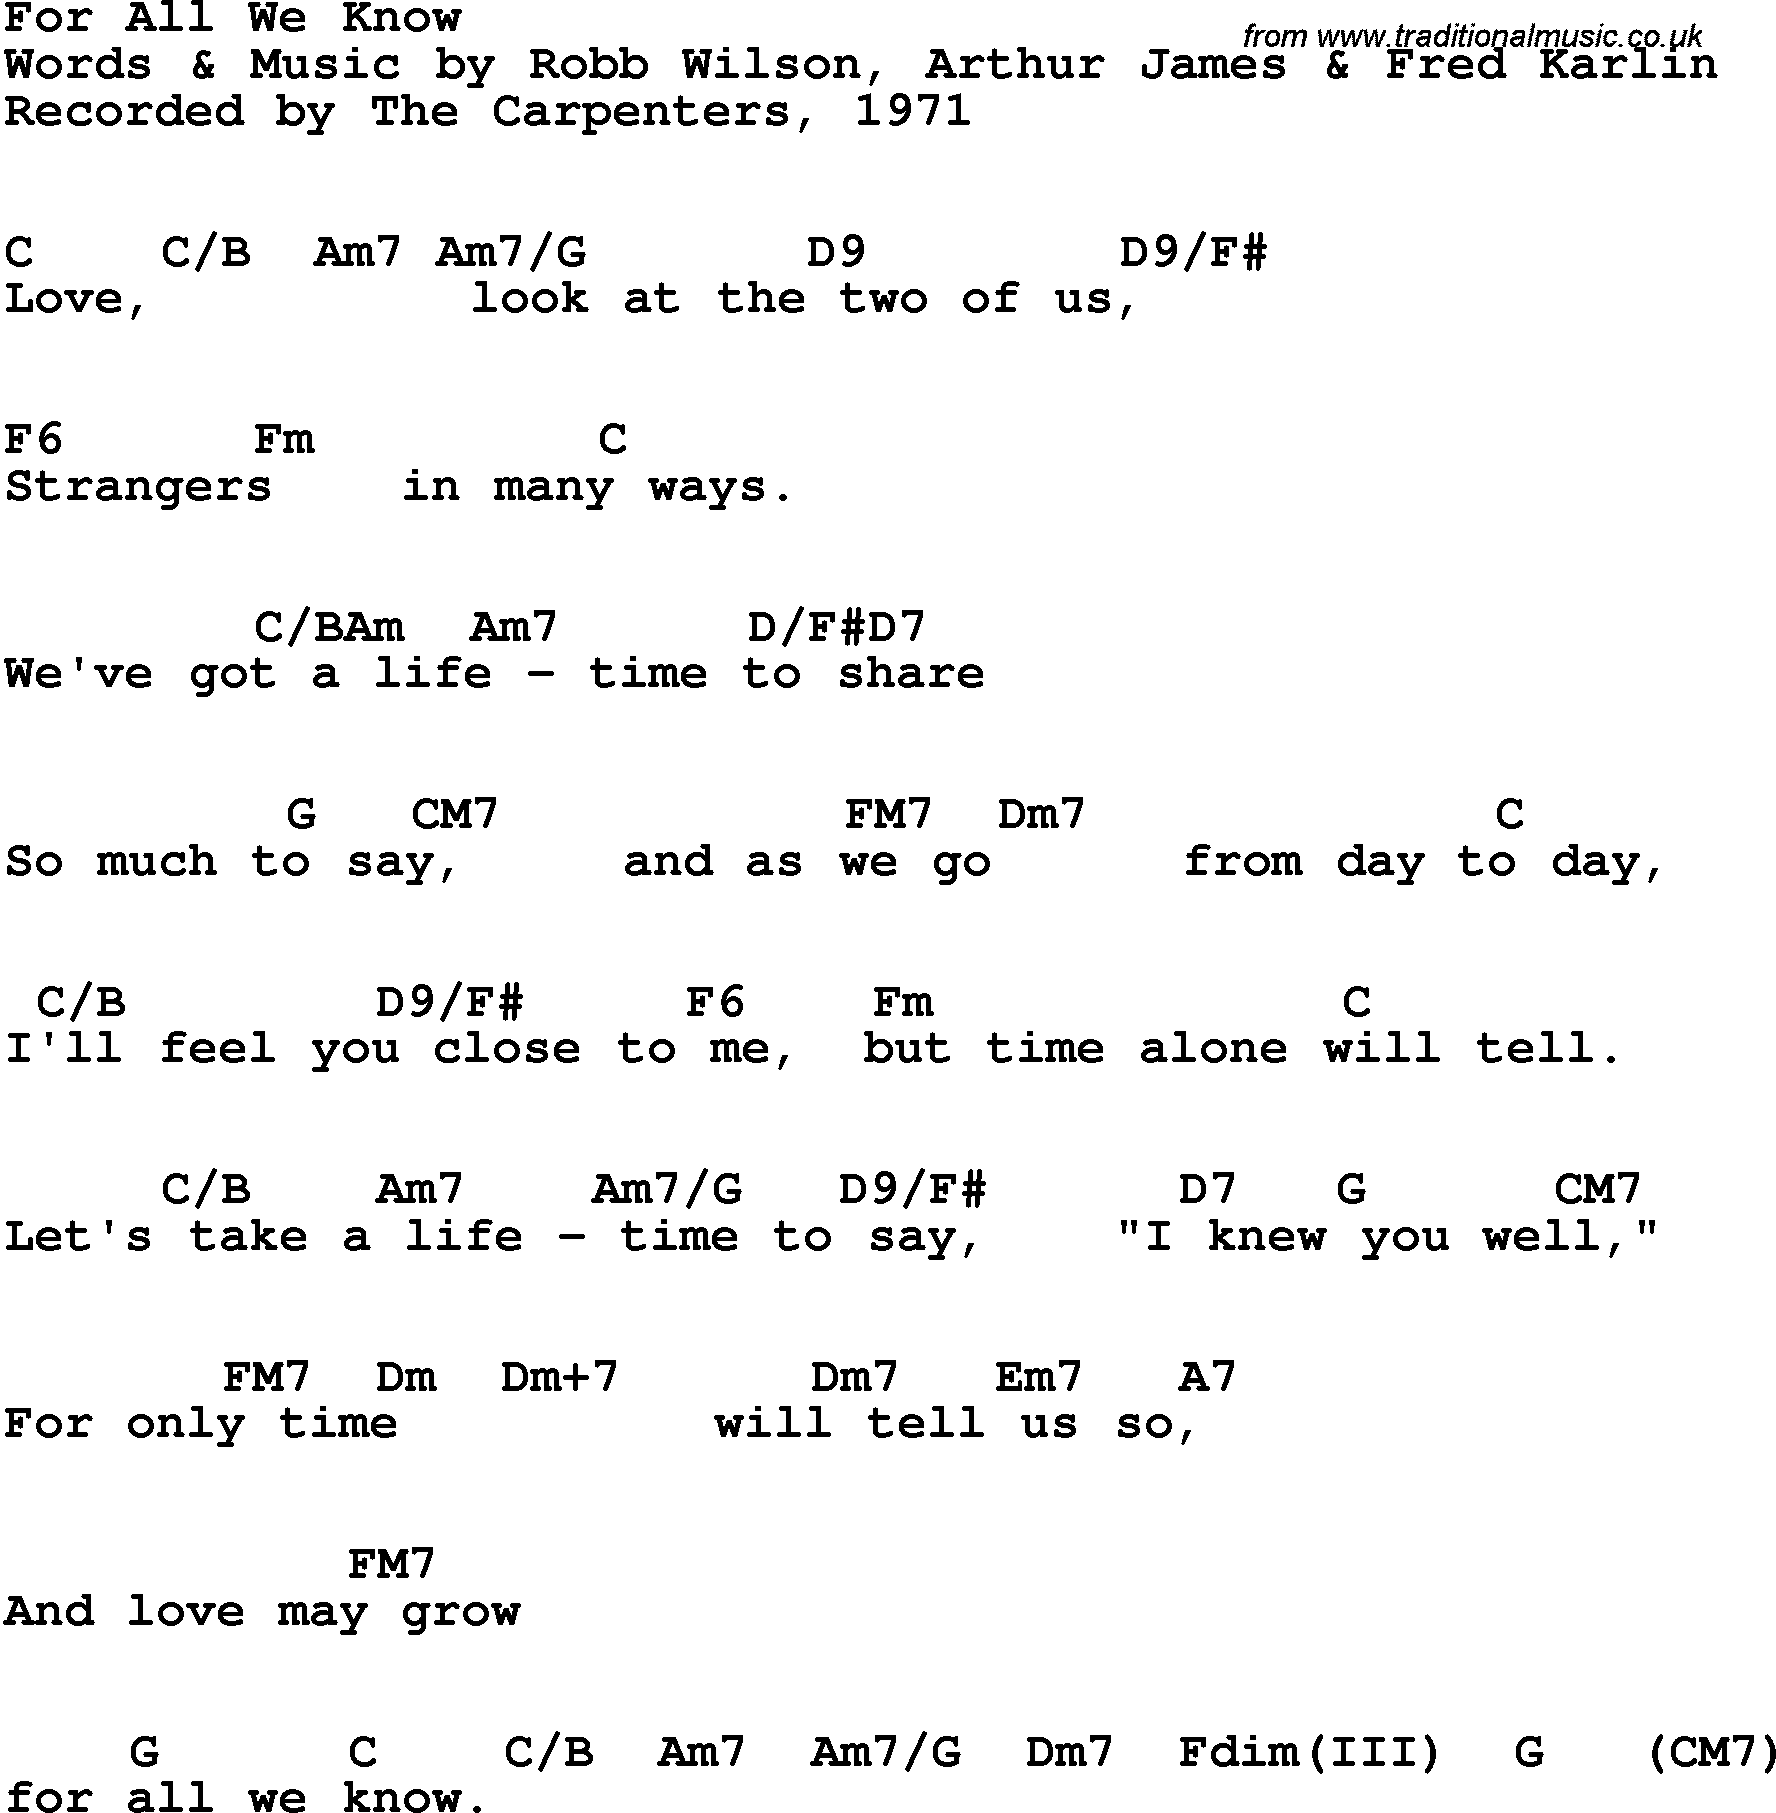 Song Lyrics with guitar chords for For All We Know - The Carpenters, 1971